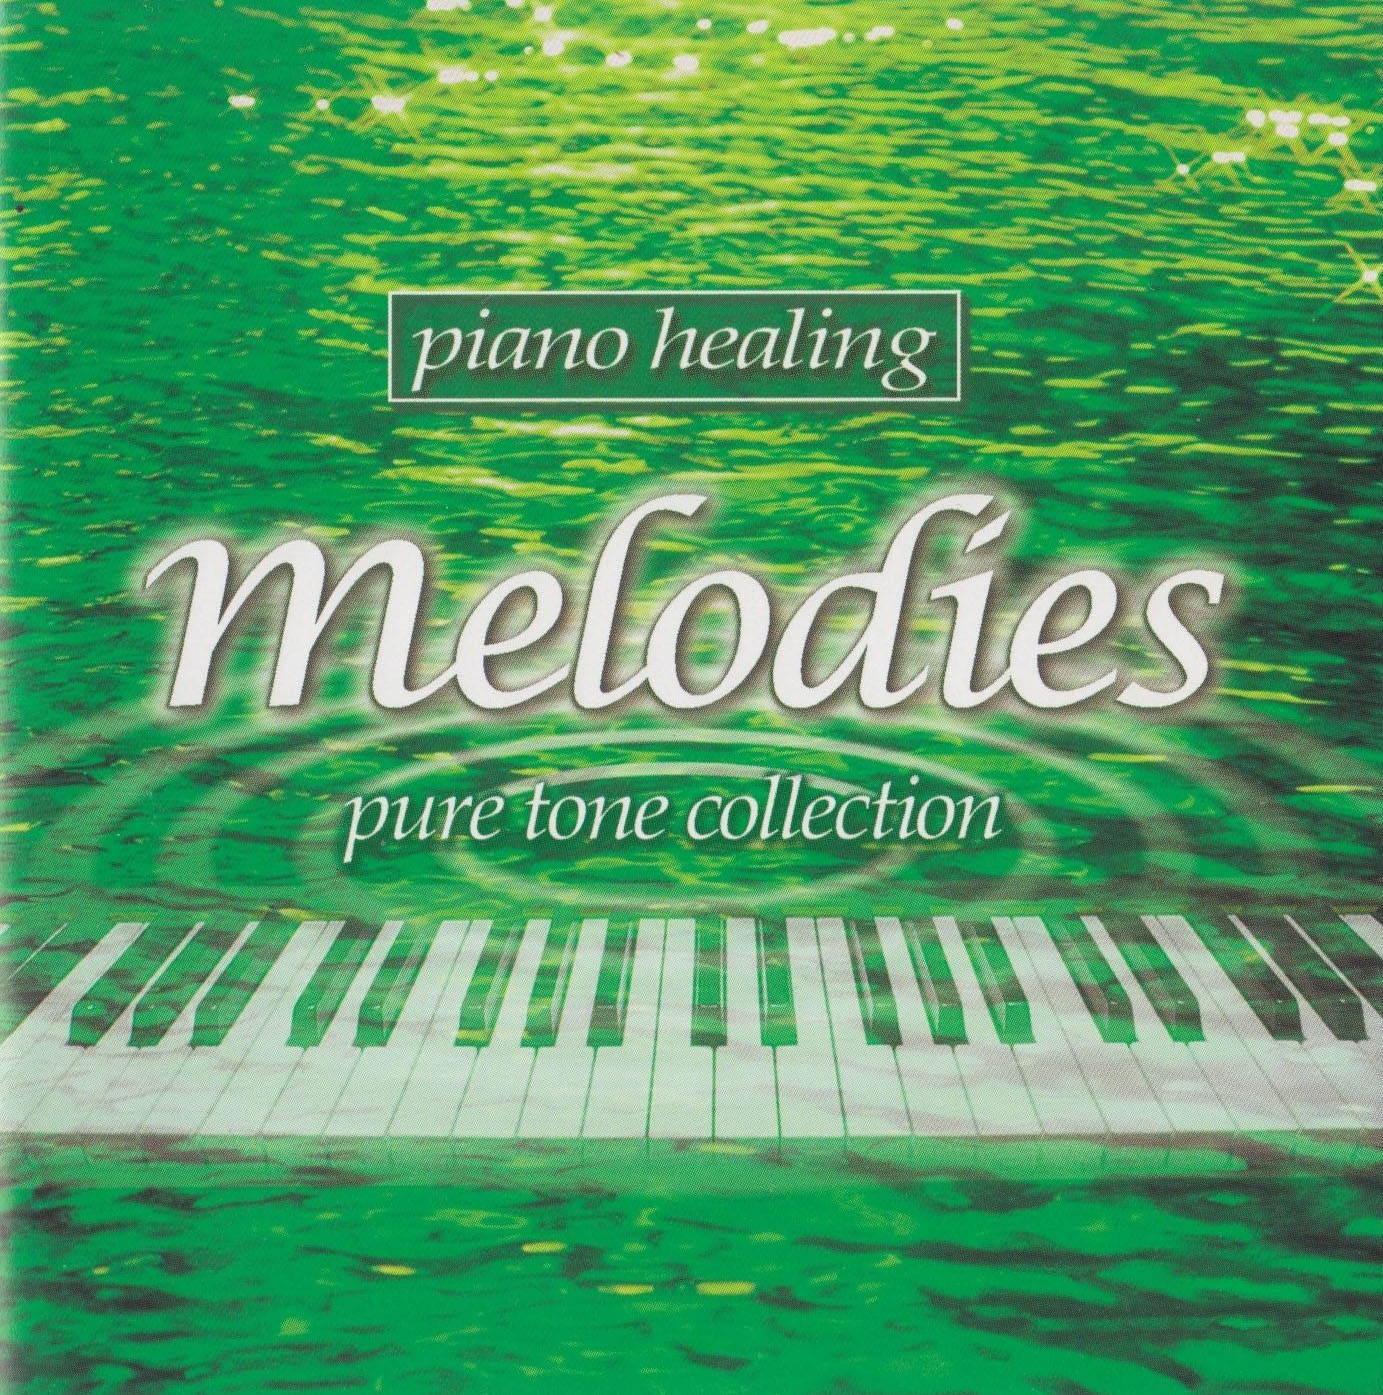 Pure tone. Tone collection. Music collection 2001. Naive Melody talking heads. Va - Melody Hits World Instrumental - best Melodies [2008].